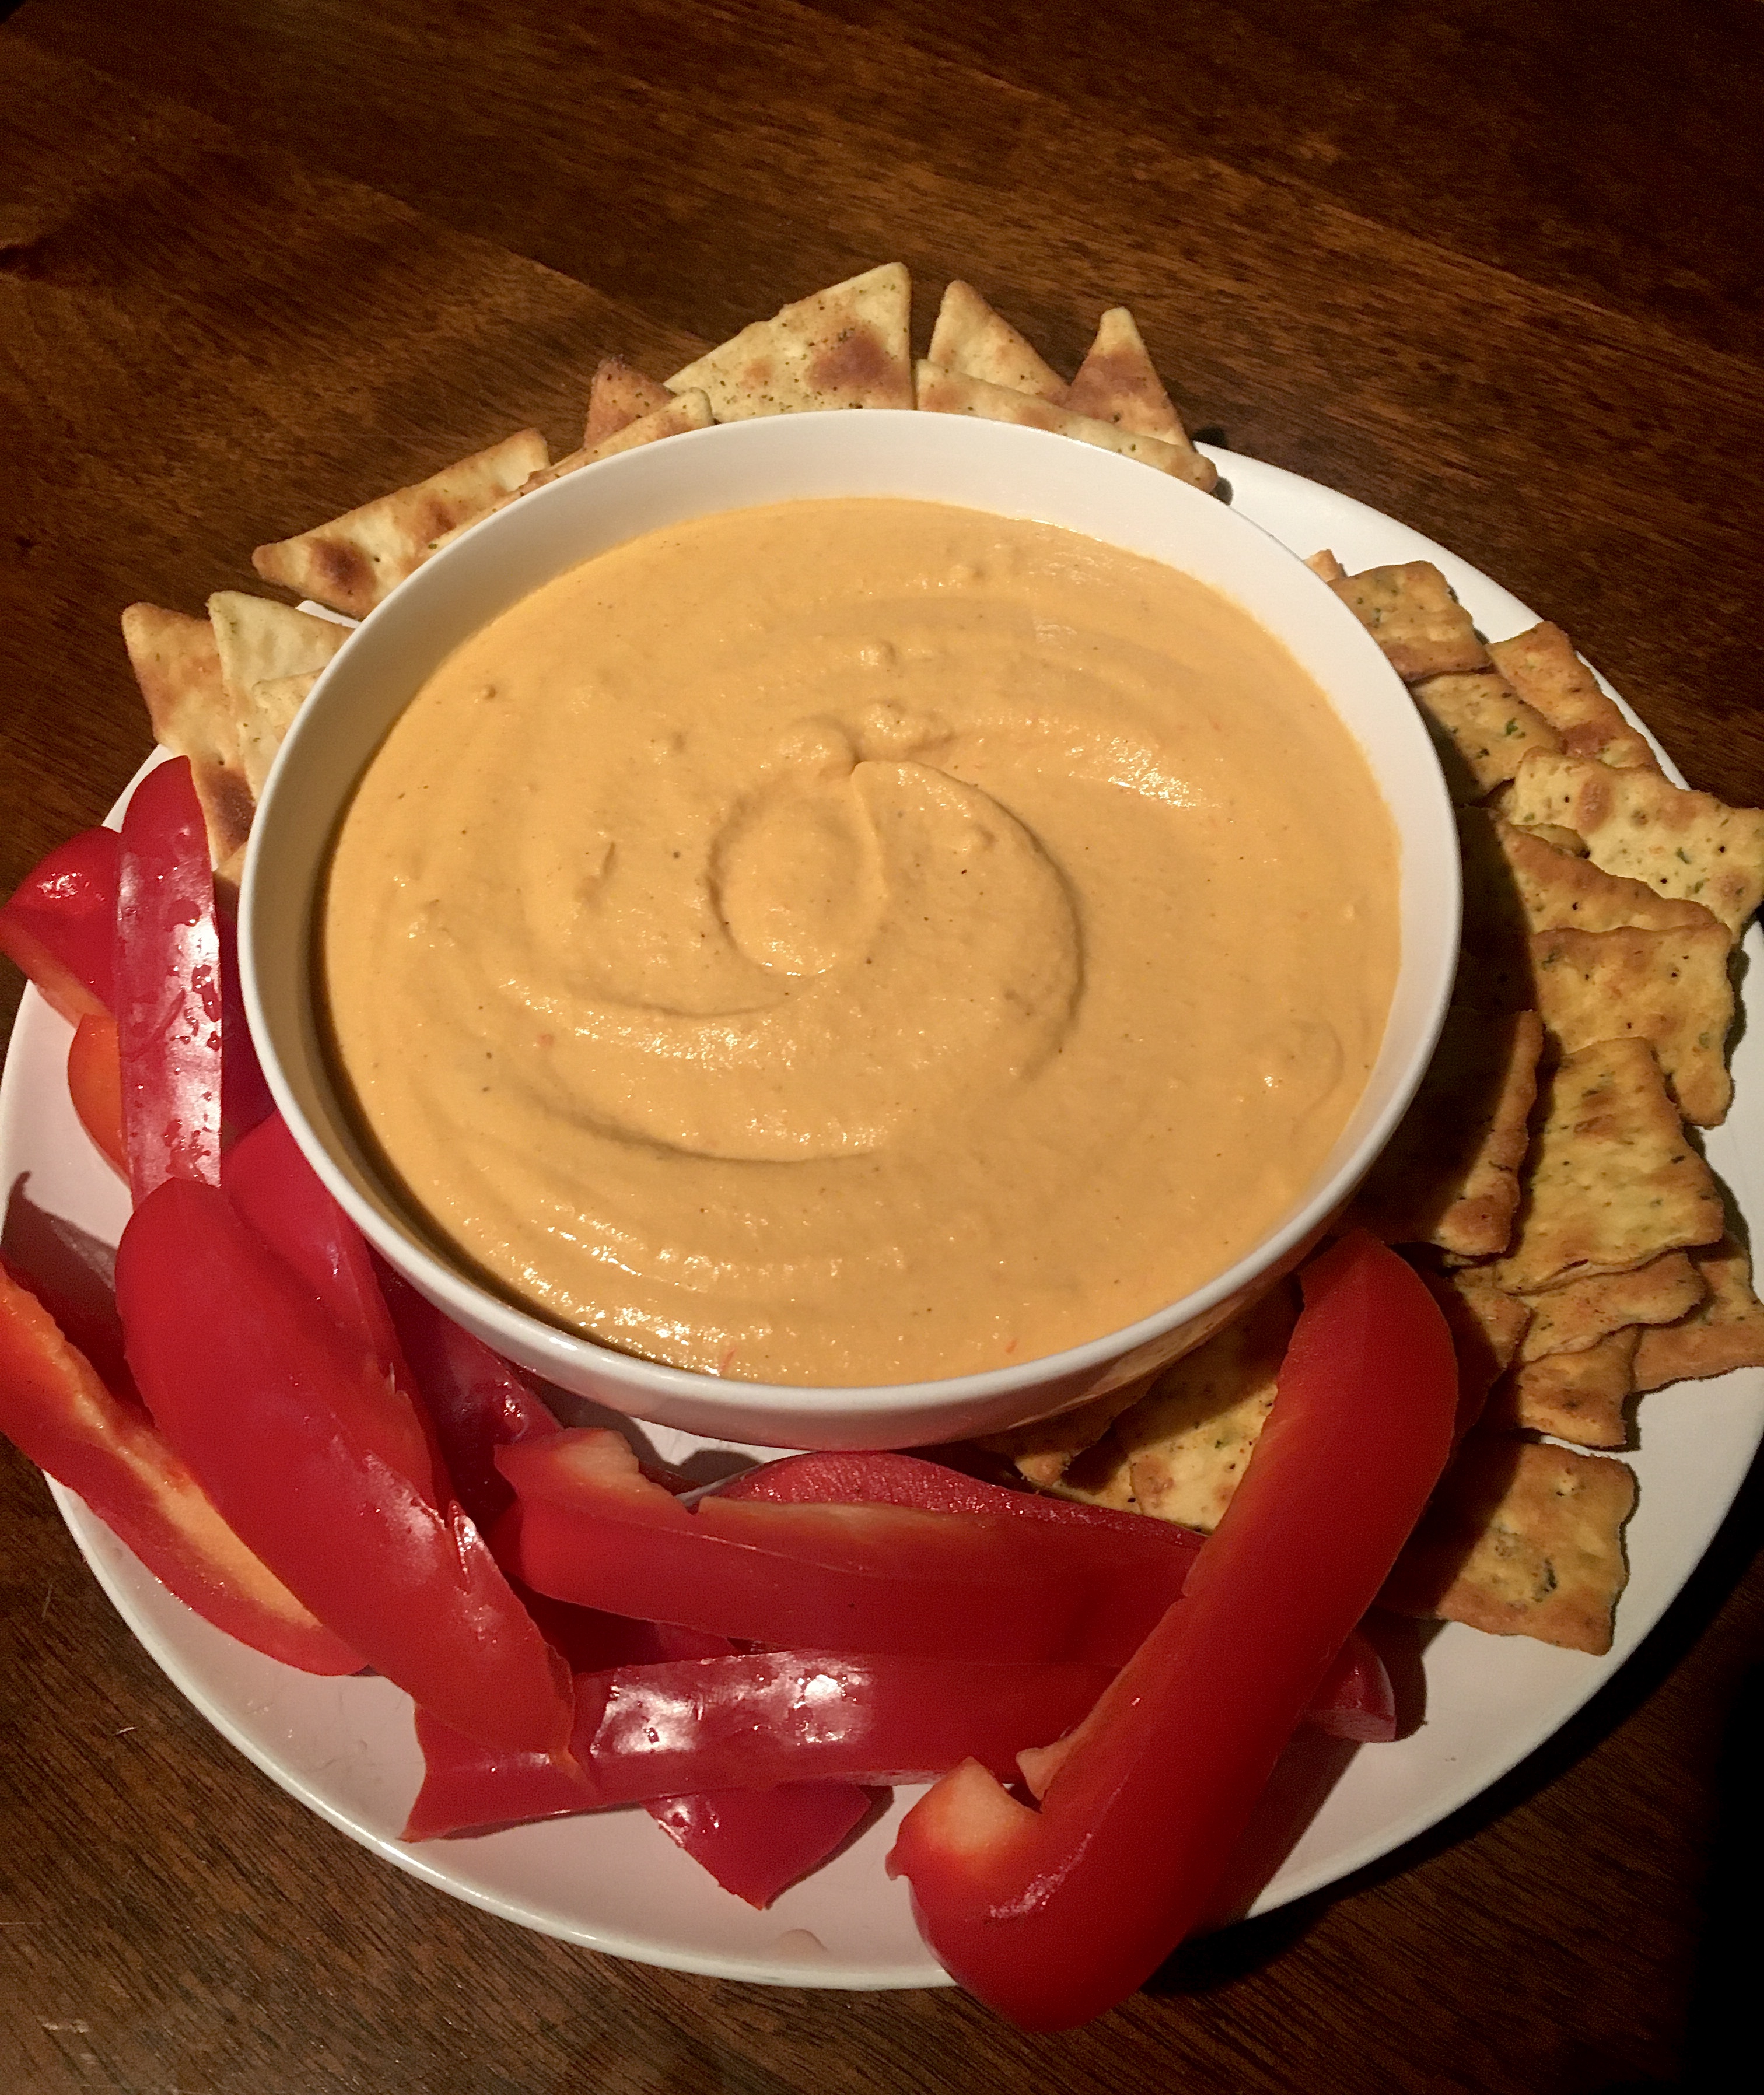 This roasted bell pepper hummus is nutrient-rich and lower in calories. (NDSU photo)